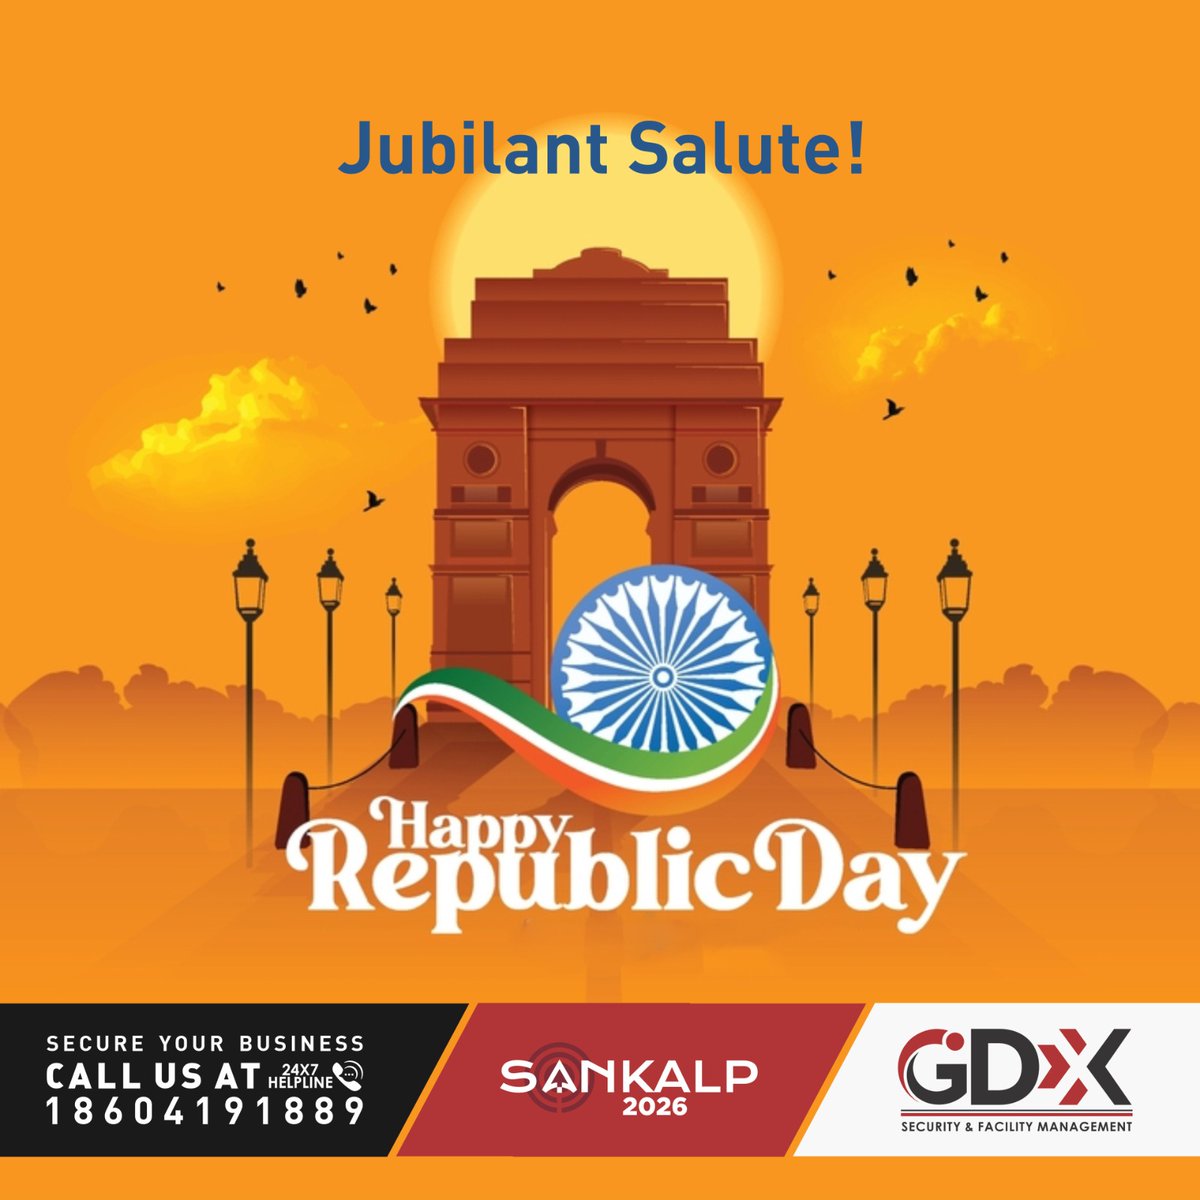 As the tricolor unfurls, so does our collective pride. Cheers to the 75th Republic Day and the spirit that defines us!
Call us anytime at our 24x7 helpline: 18604191889
#Jaihind #RepublicDay
#FEILDTRAINING #GDXGroup #Officesecurity #businessexpansion #Sankalp2026
#www.gdxgroup.in